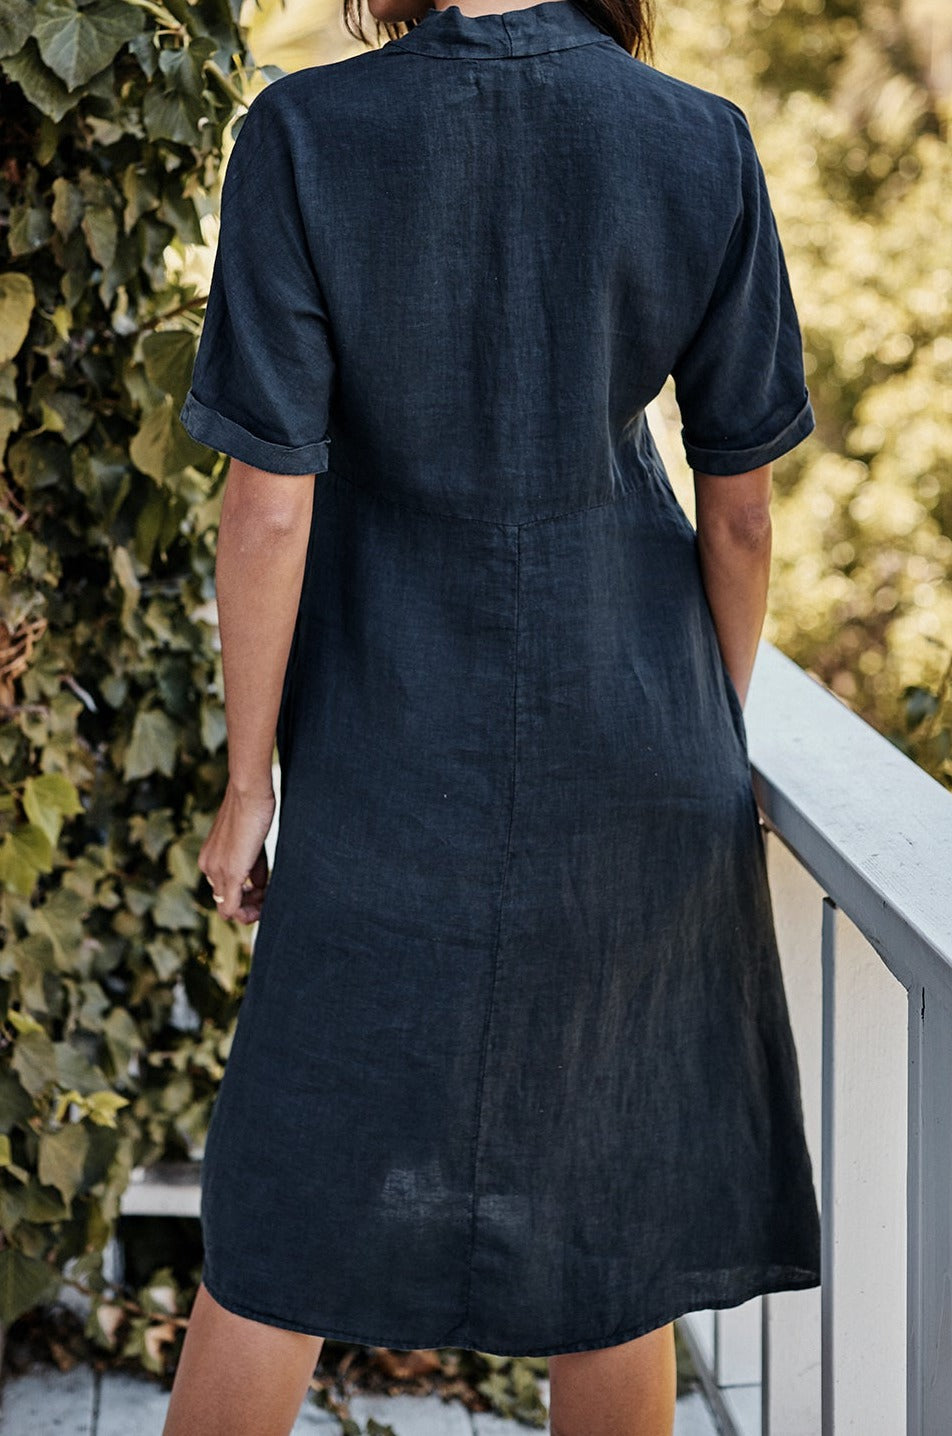 The back view of a woman wearing a Velvet by Graham & Spencer WINLEY LINEN DRESS.-21830709018817